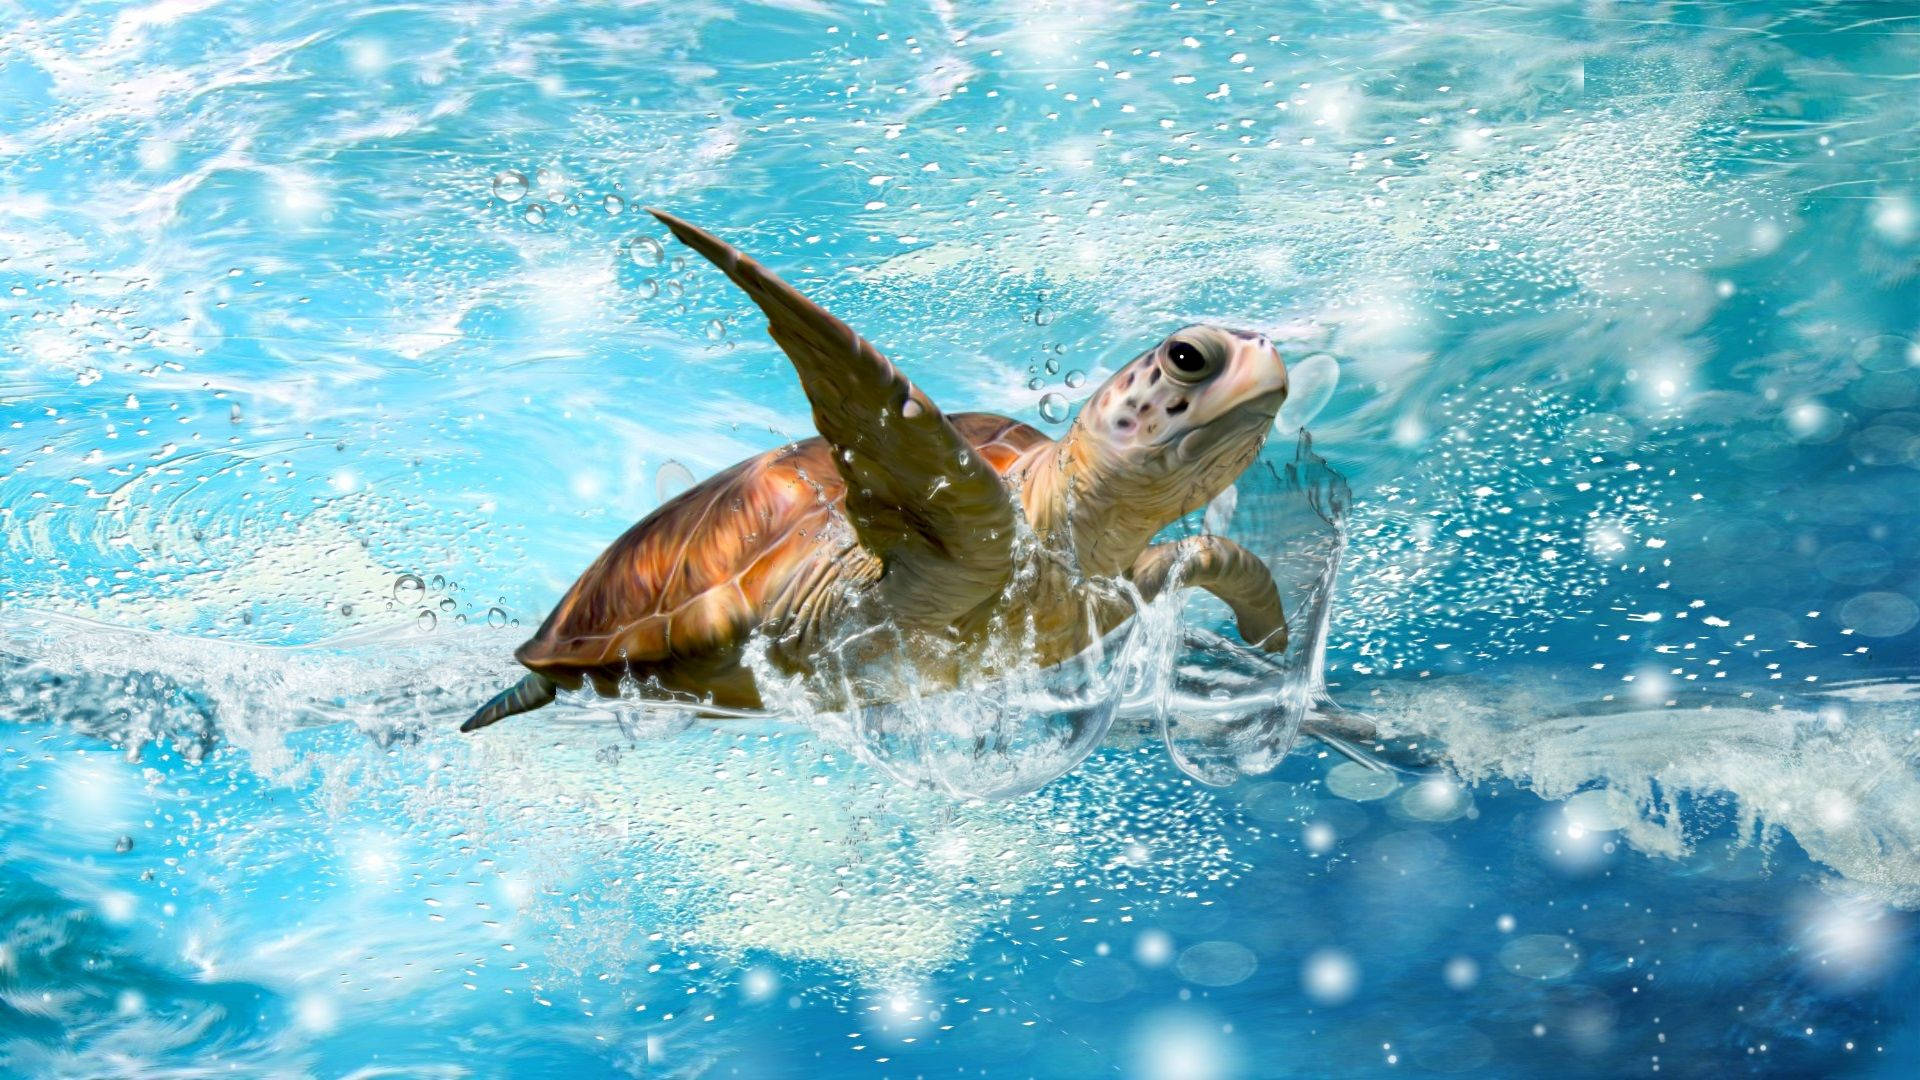 Free Cute Turtle Wallpaper Downloads, [100+] Cute Turtle Wallpapers for  FREE 